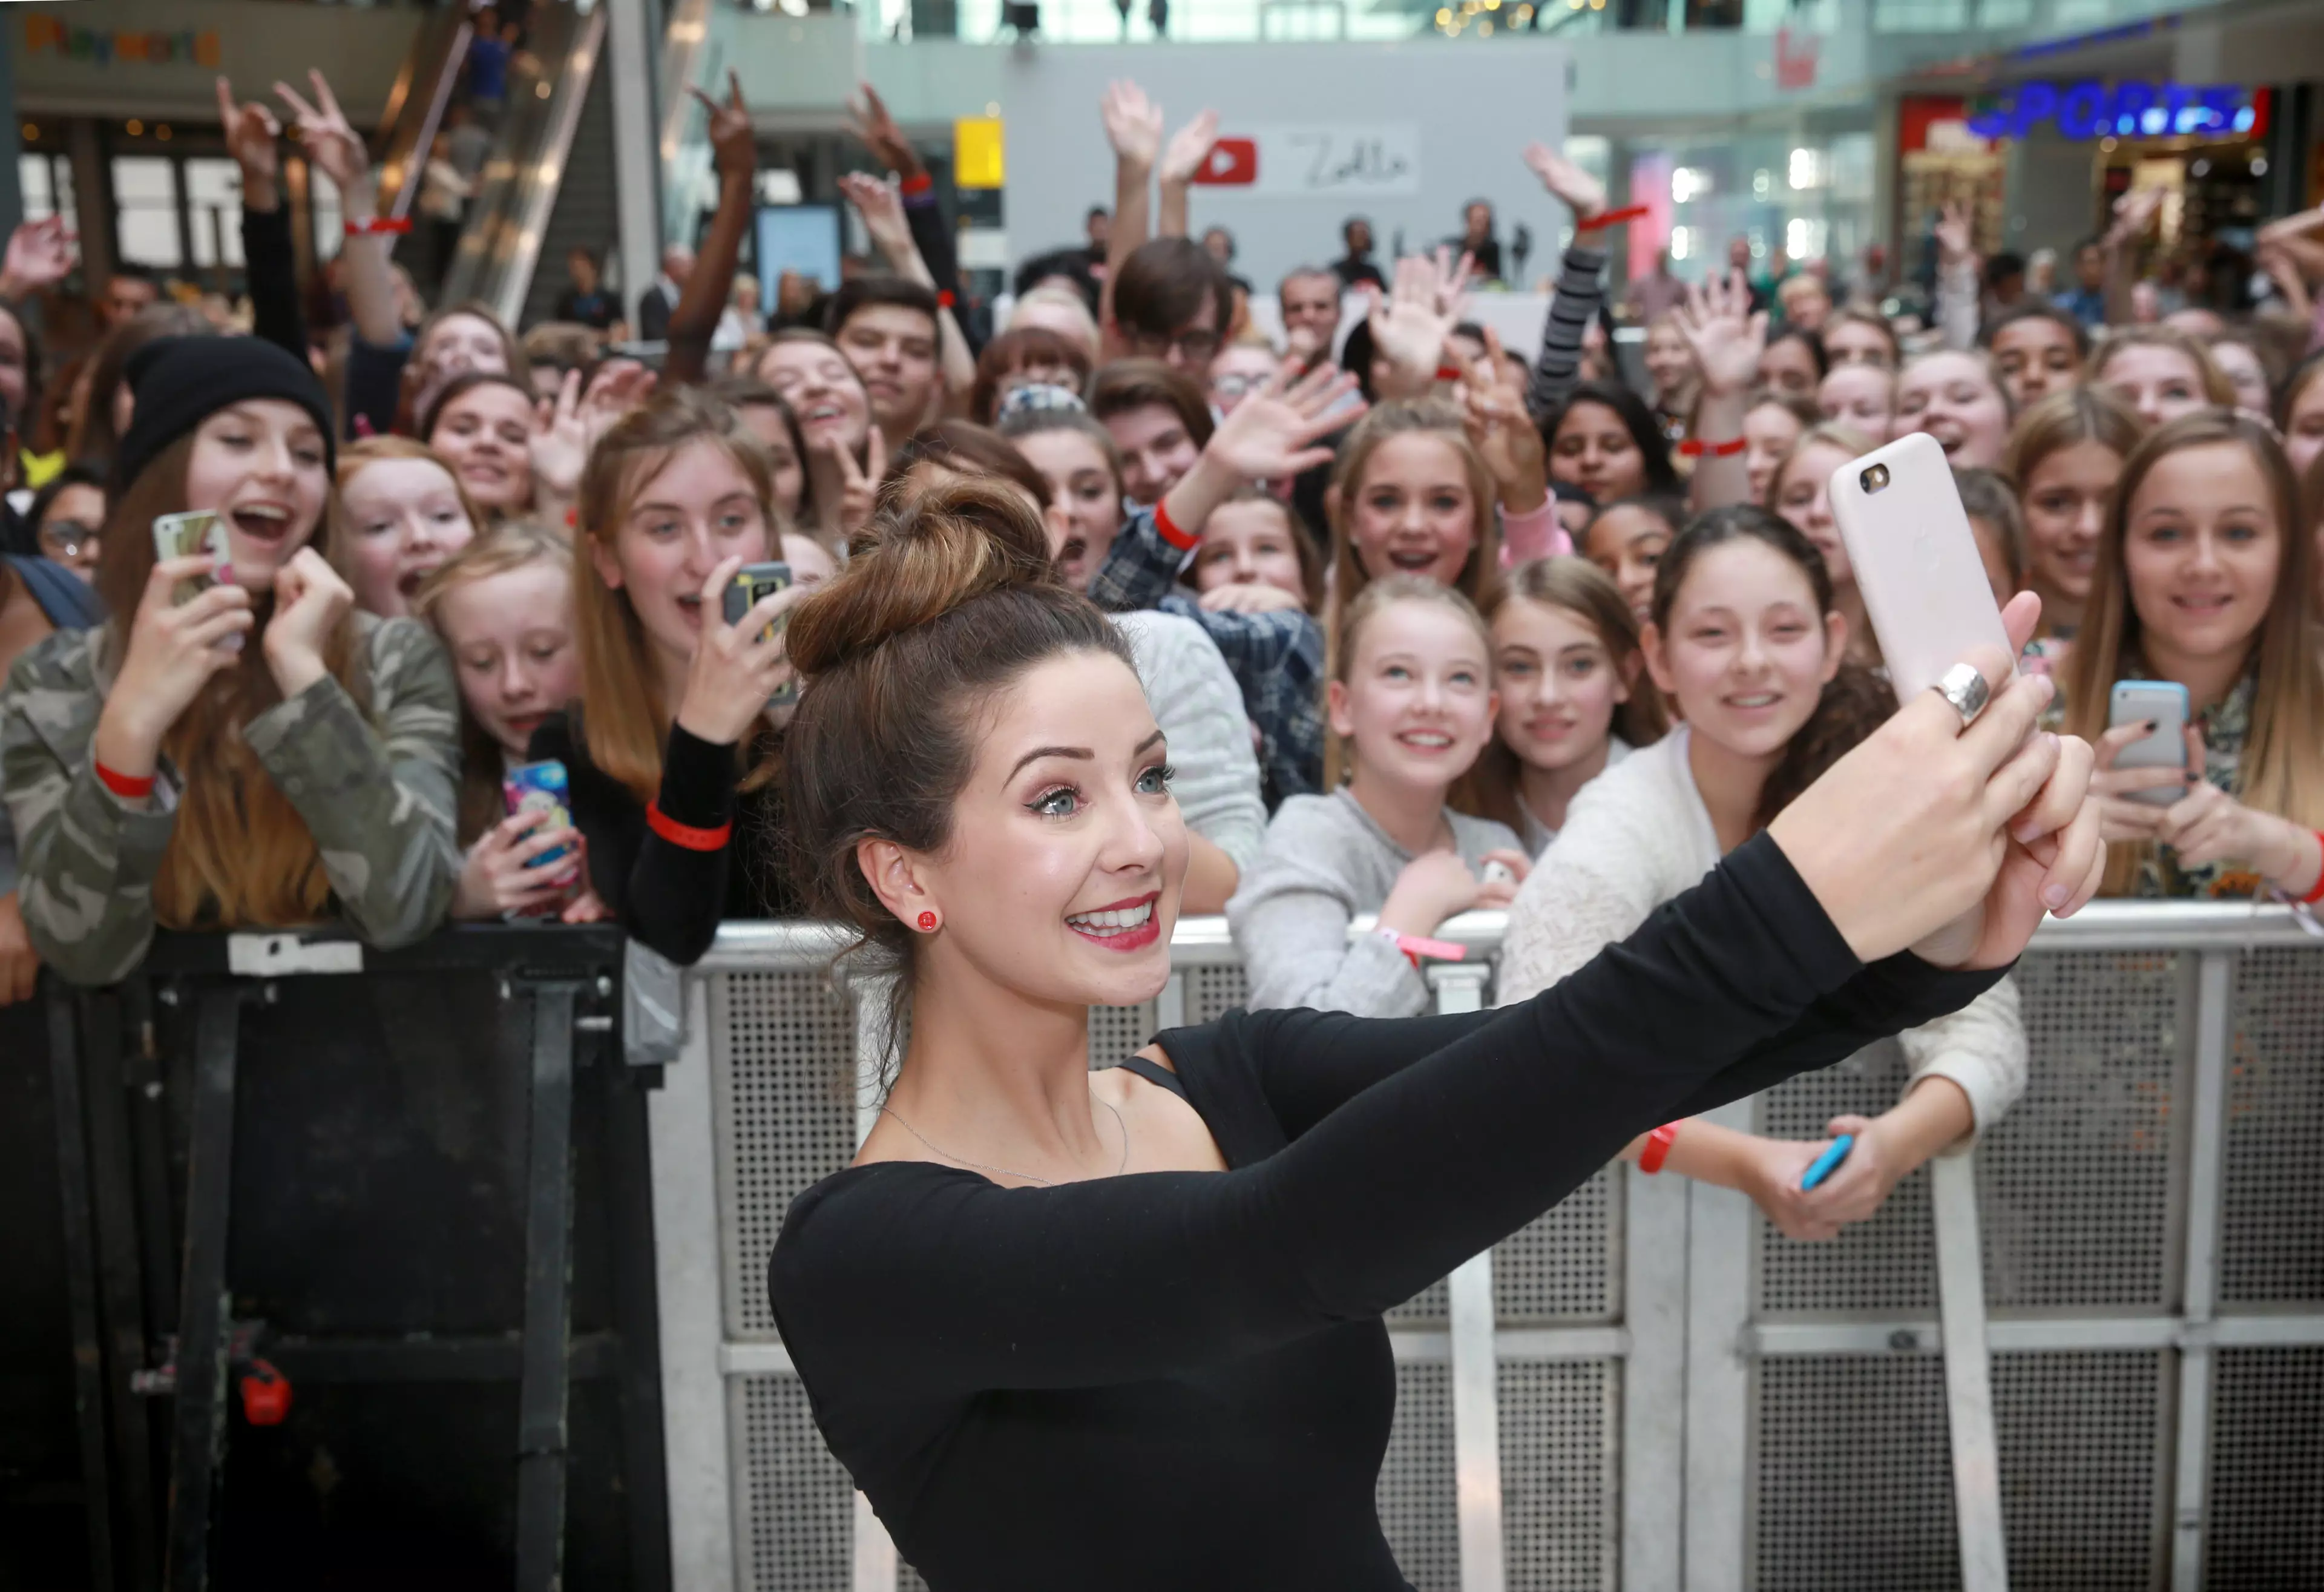 Zoella has been popular amongst young girls and teens (